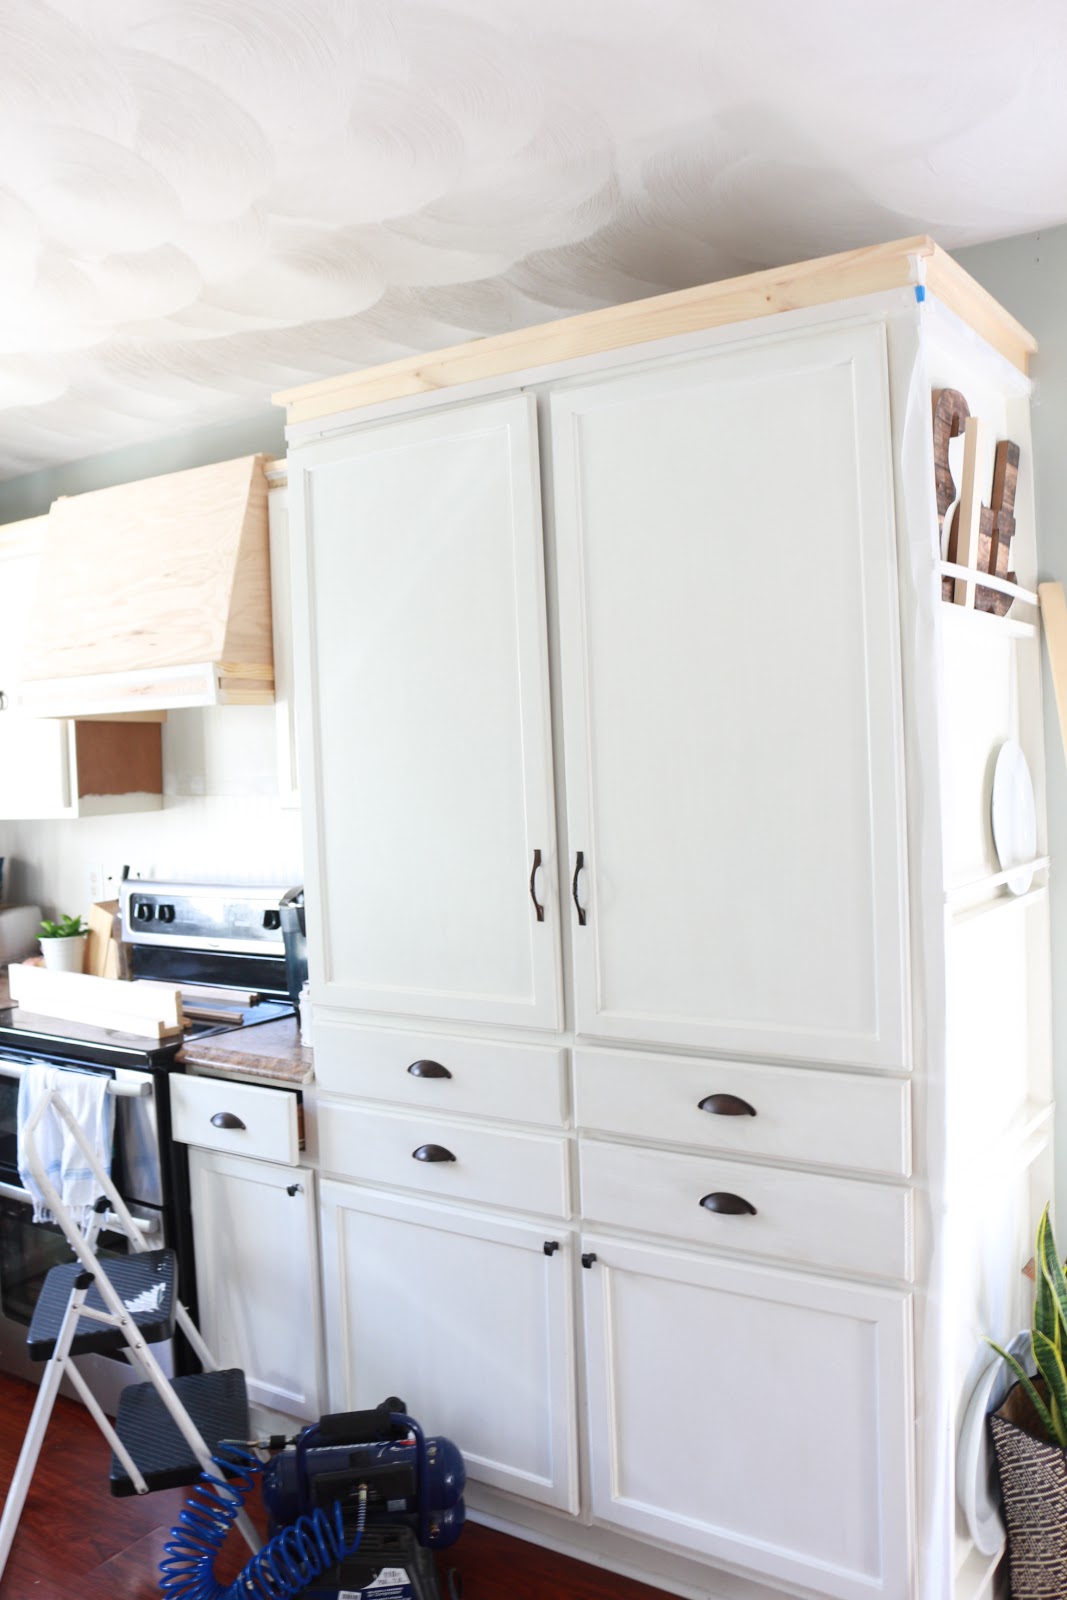 DIY FAUX VENT HOOD – With Love, Mercedes